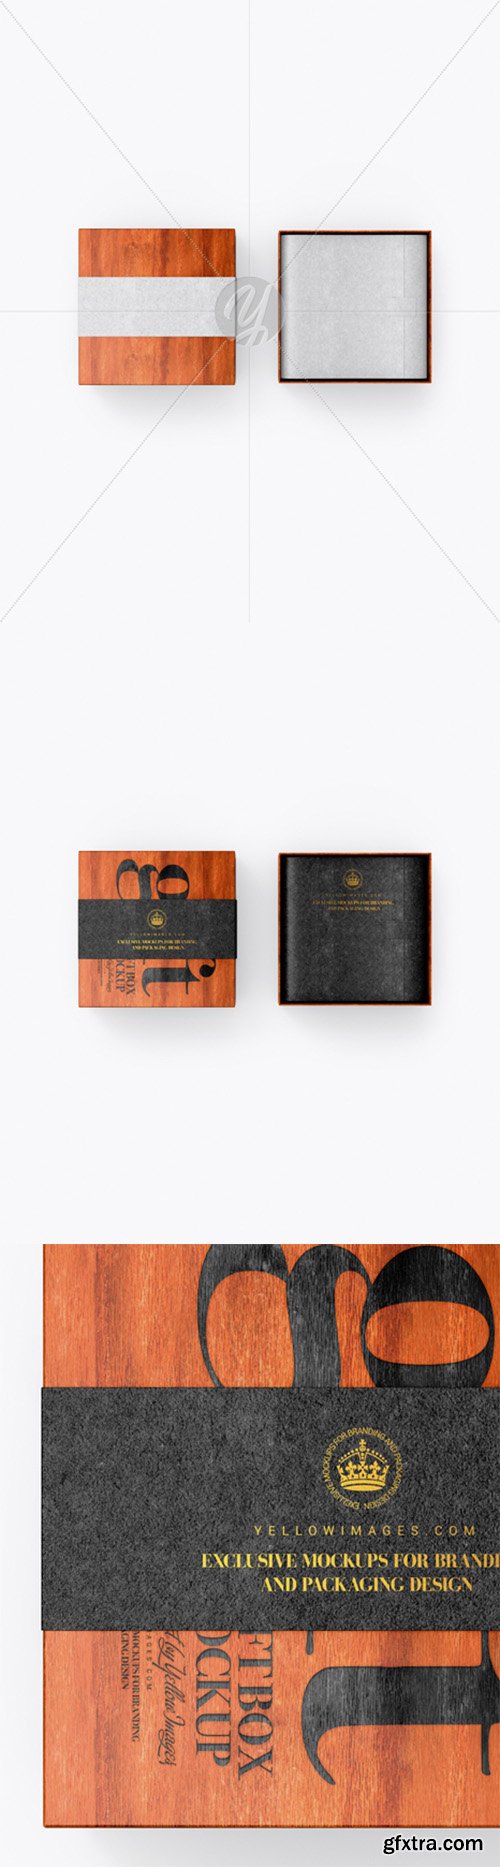 Two Wooden Boxes with Label Mockup - Top View 25262